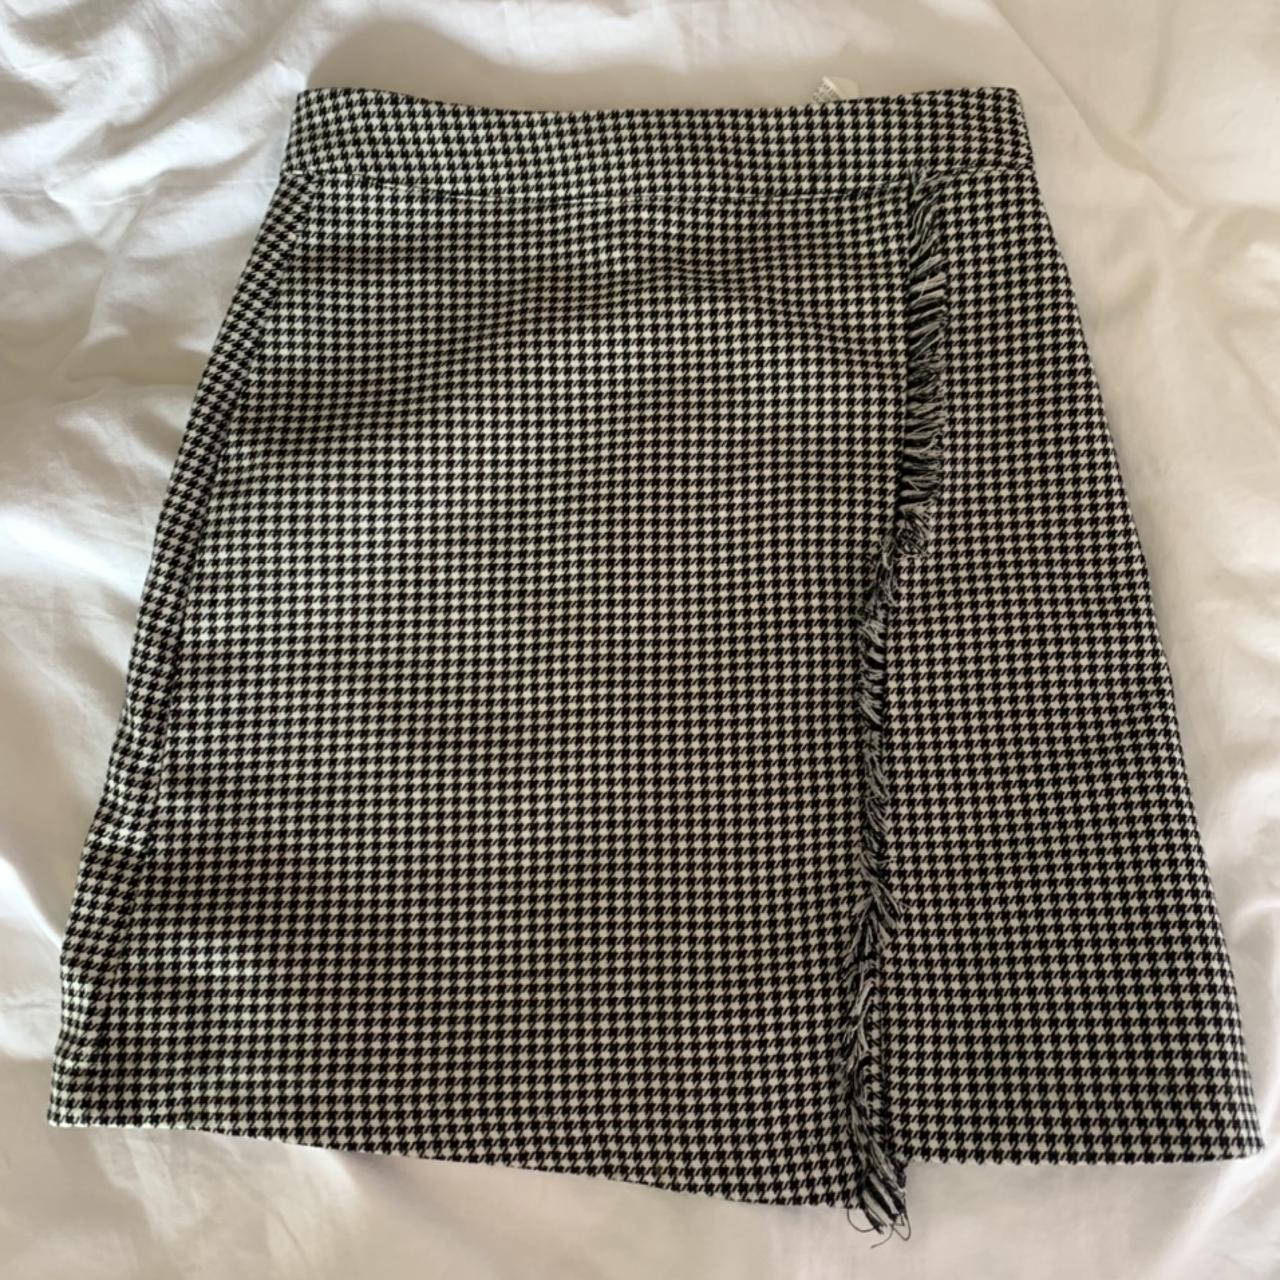 PULL&BEAR checked mini skirt. Perfect for sixth... - Depop